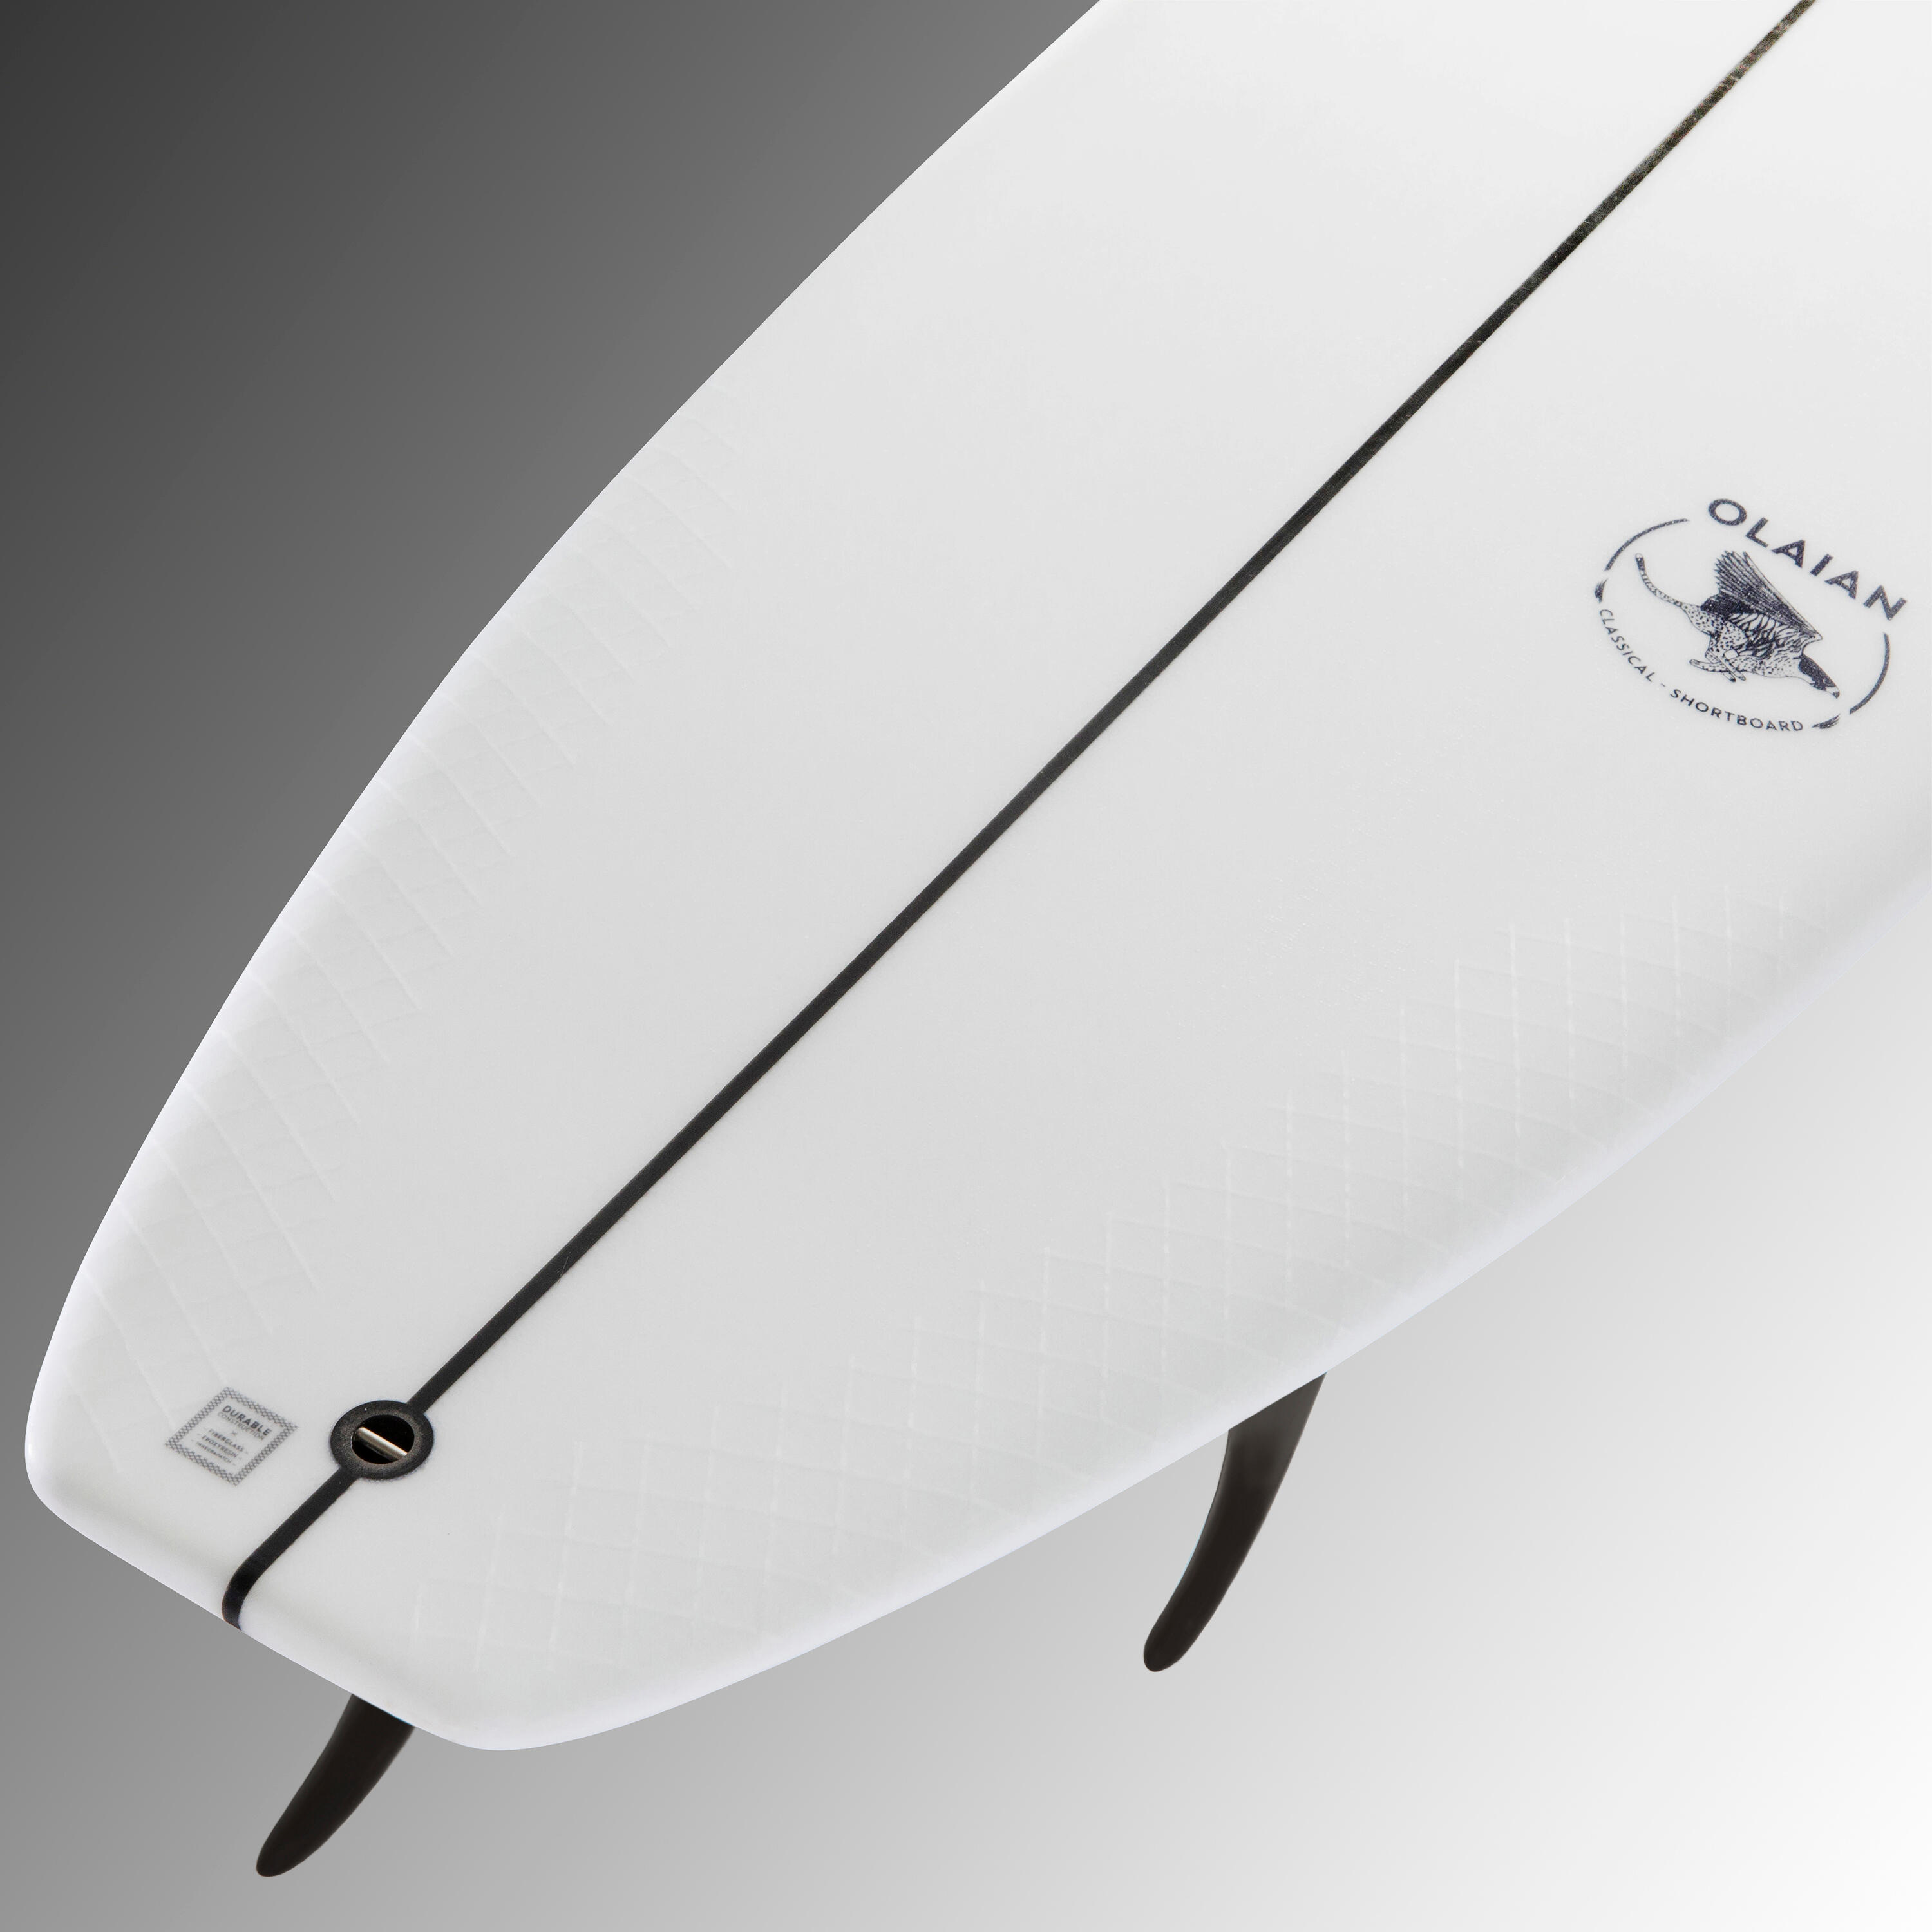 SHORTBOARD 900 6'1" 33 L. Supplied with 3 FCS2 fins 9/14